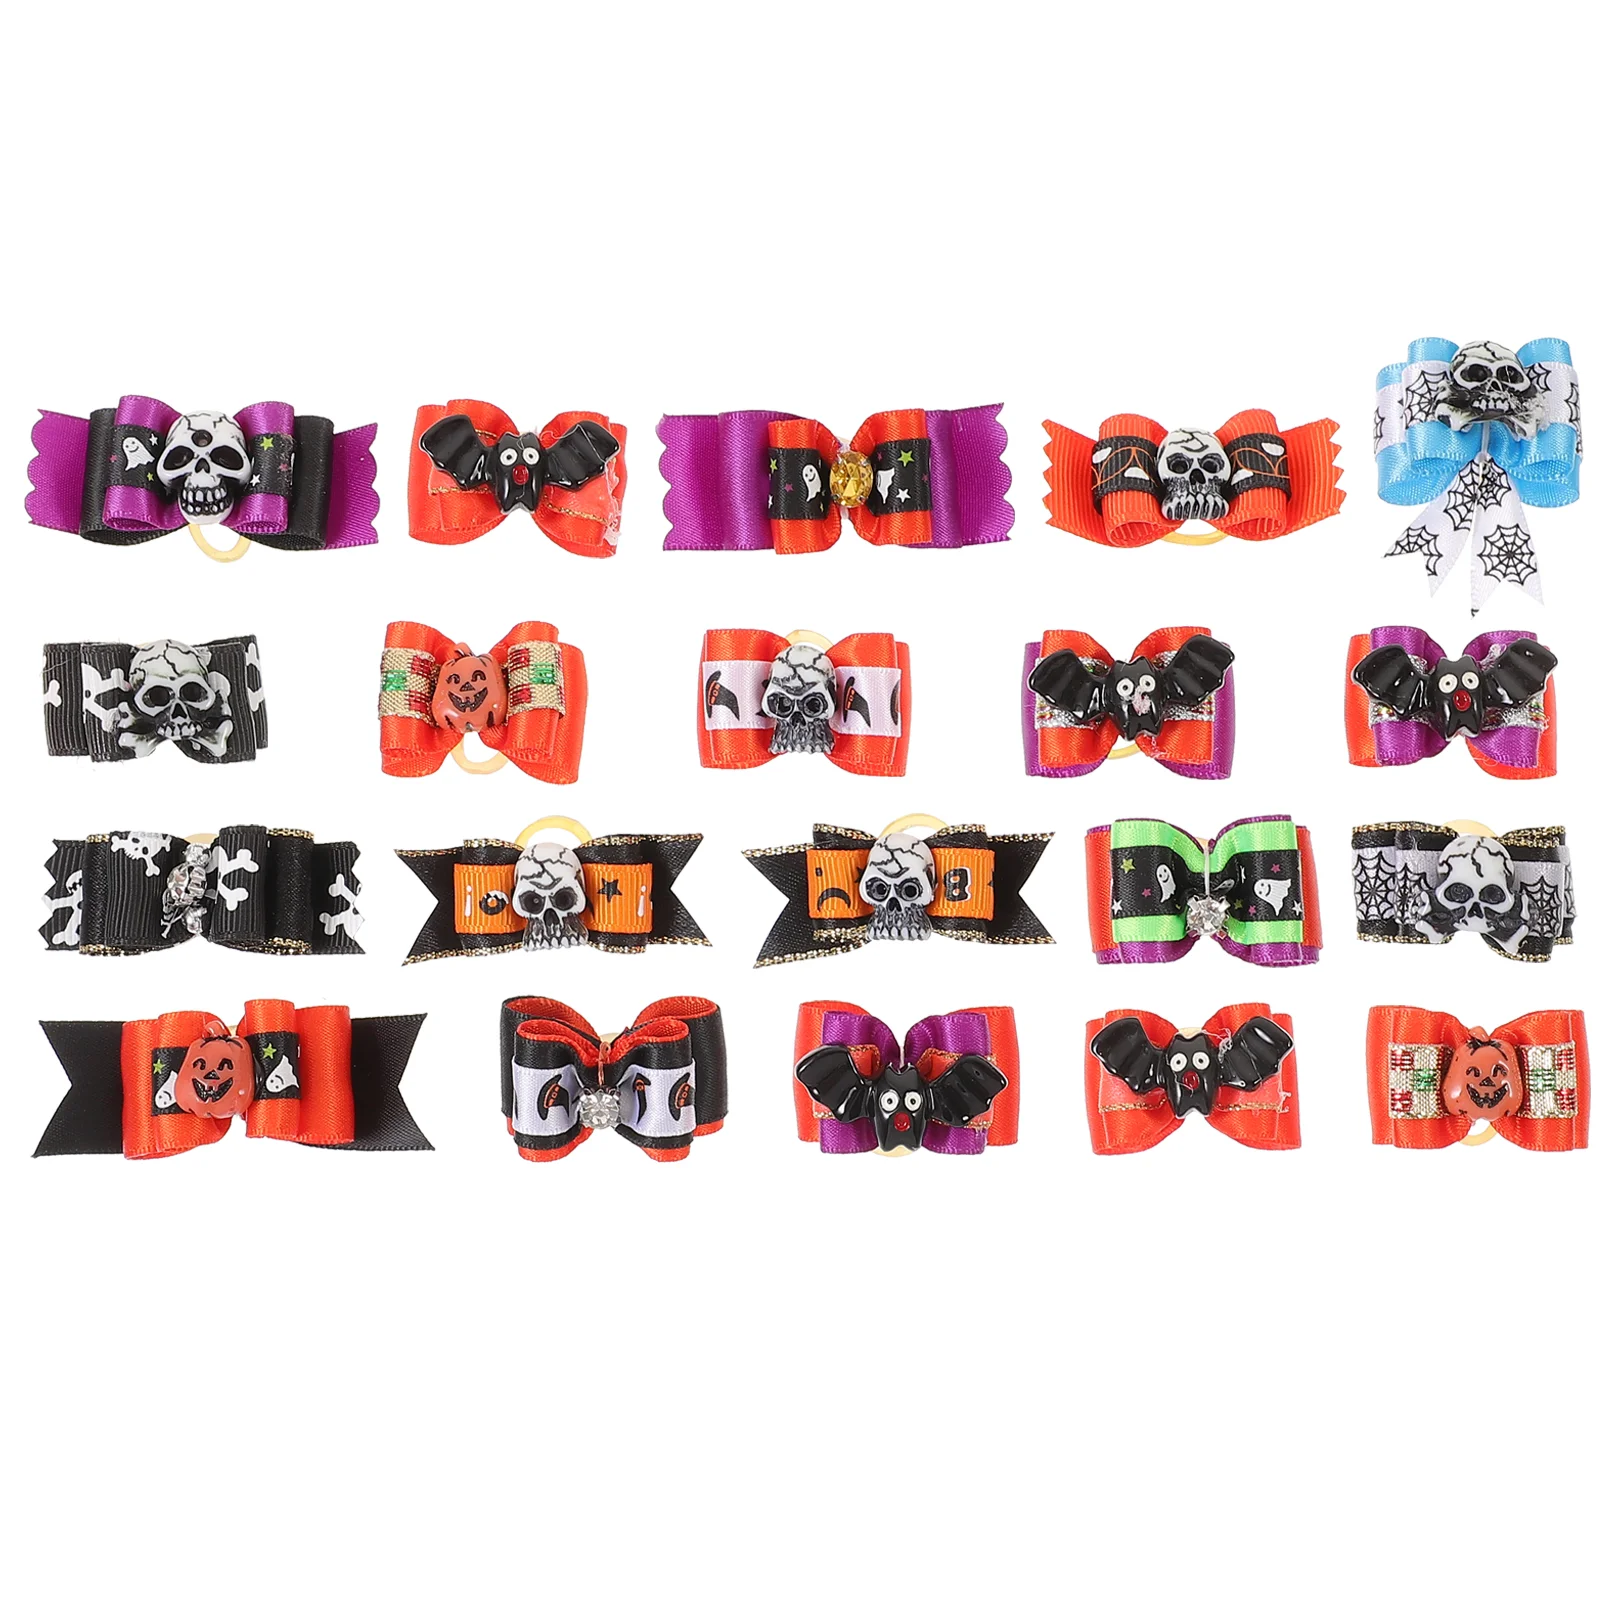 

20pcs Halloween Dog Hair Bows Pets Animals Hair Bow Ties with Rubber Band Hair Accessories